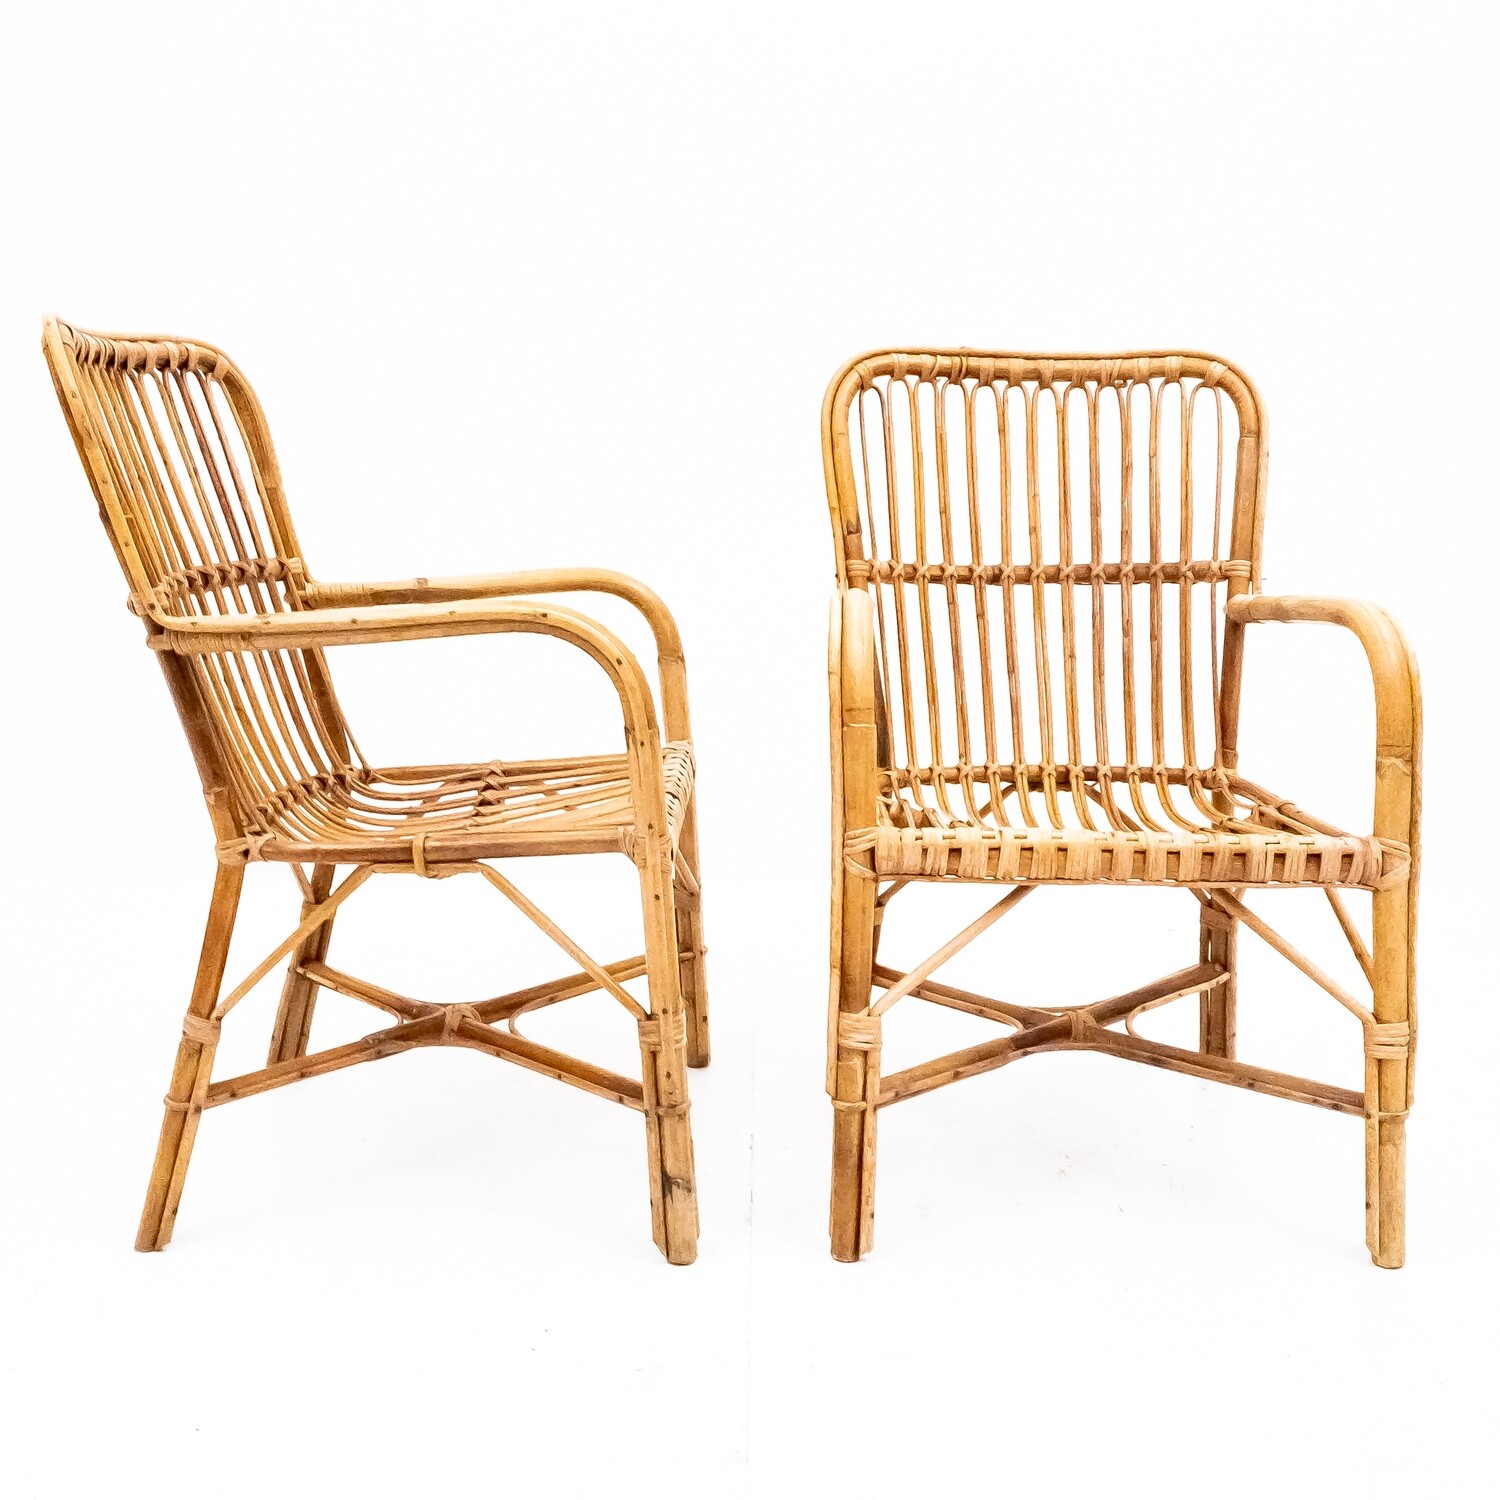 Set of 2 bamboo armchairs, Italy, 1970s